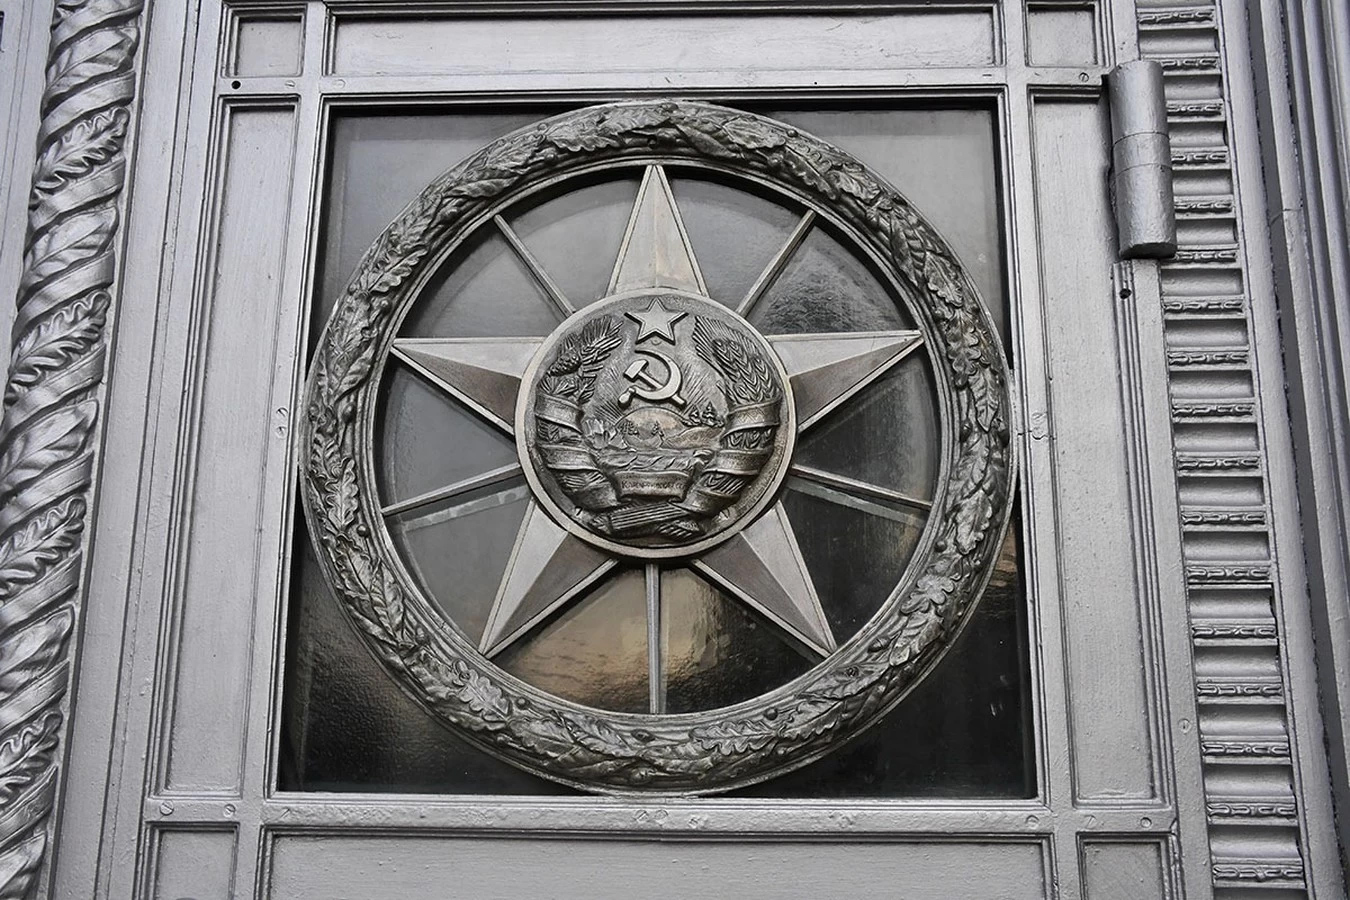 September 2020. The Coat of Arms of the Karelian-Finnish SSR on the door of the Ministry of Foreign Affairs of USSR